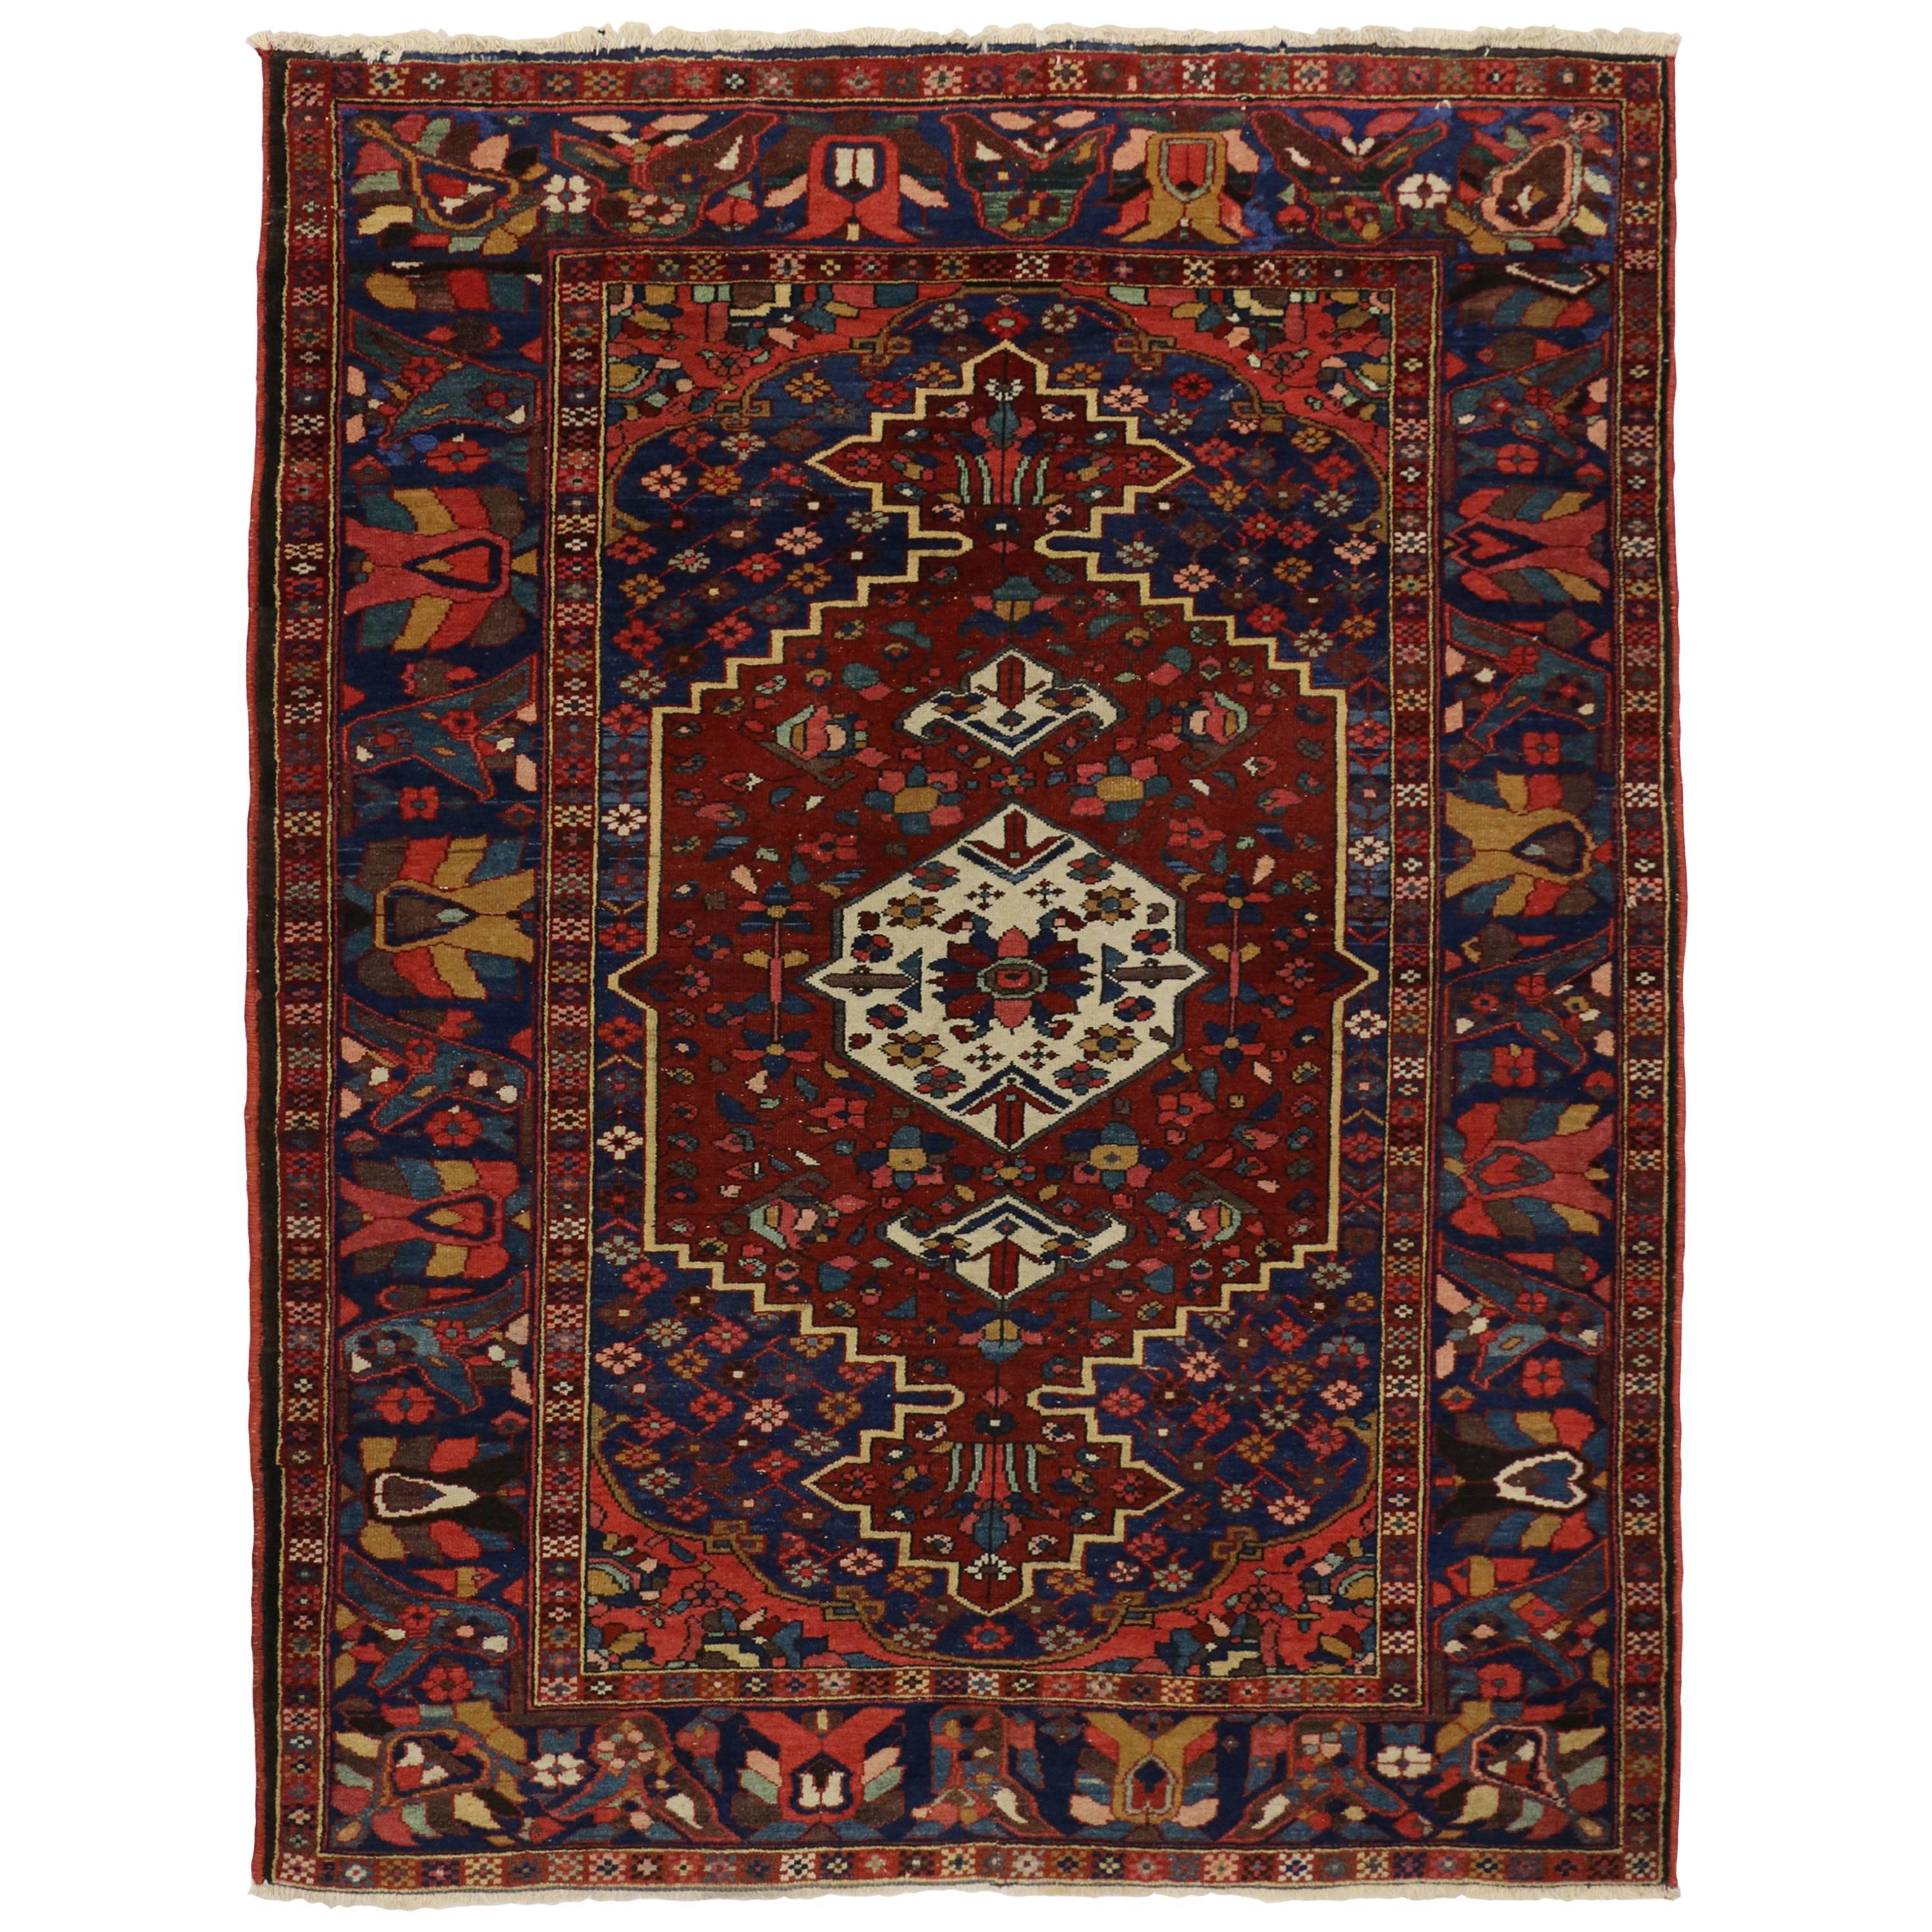 Antique Bakhtiari Persian Rug with Traditional Modern Style